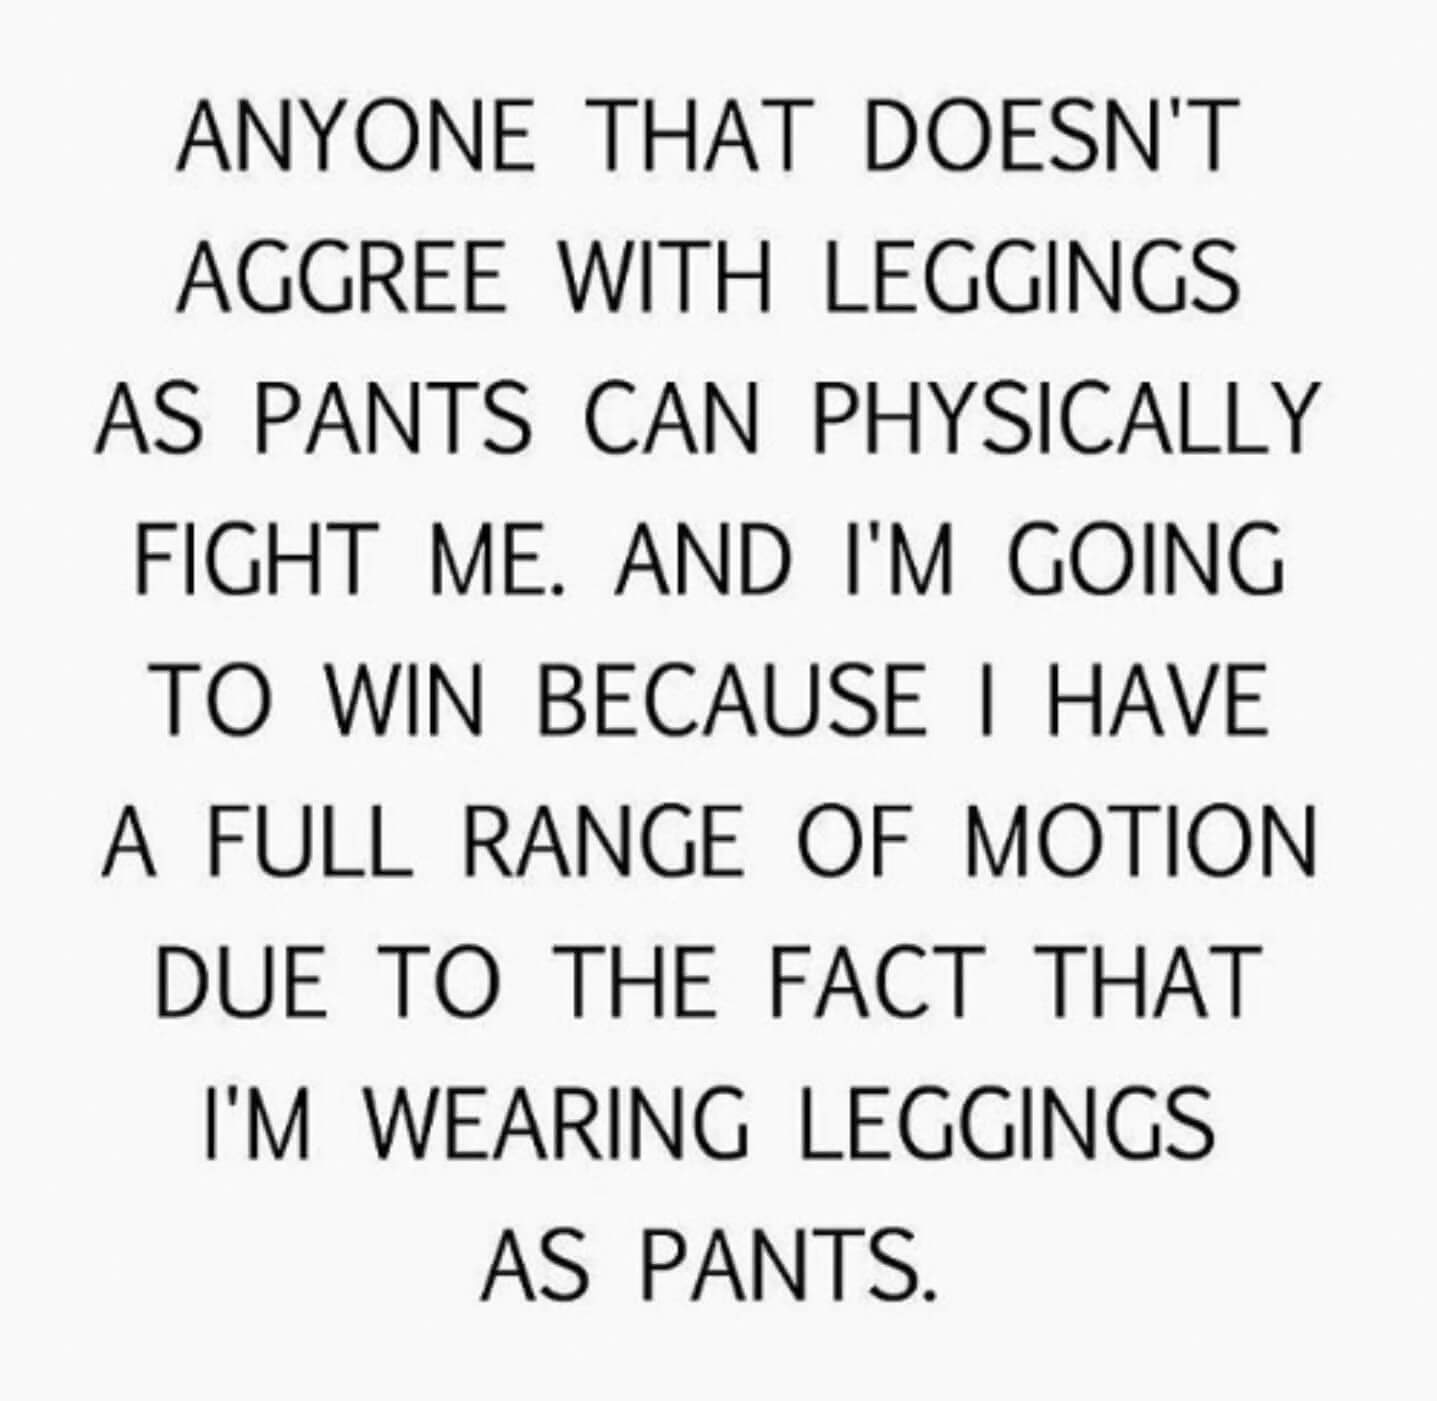 Gym Memes - Your new go-to leggings are here 💜🔥 Seamless... | Facebook